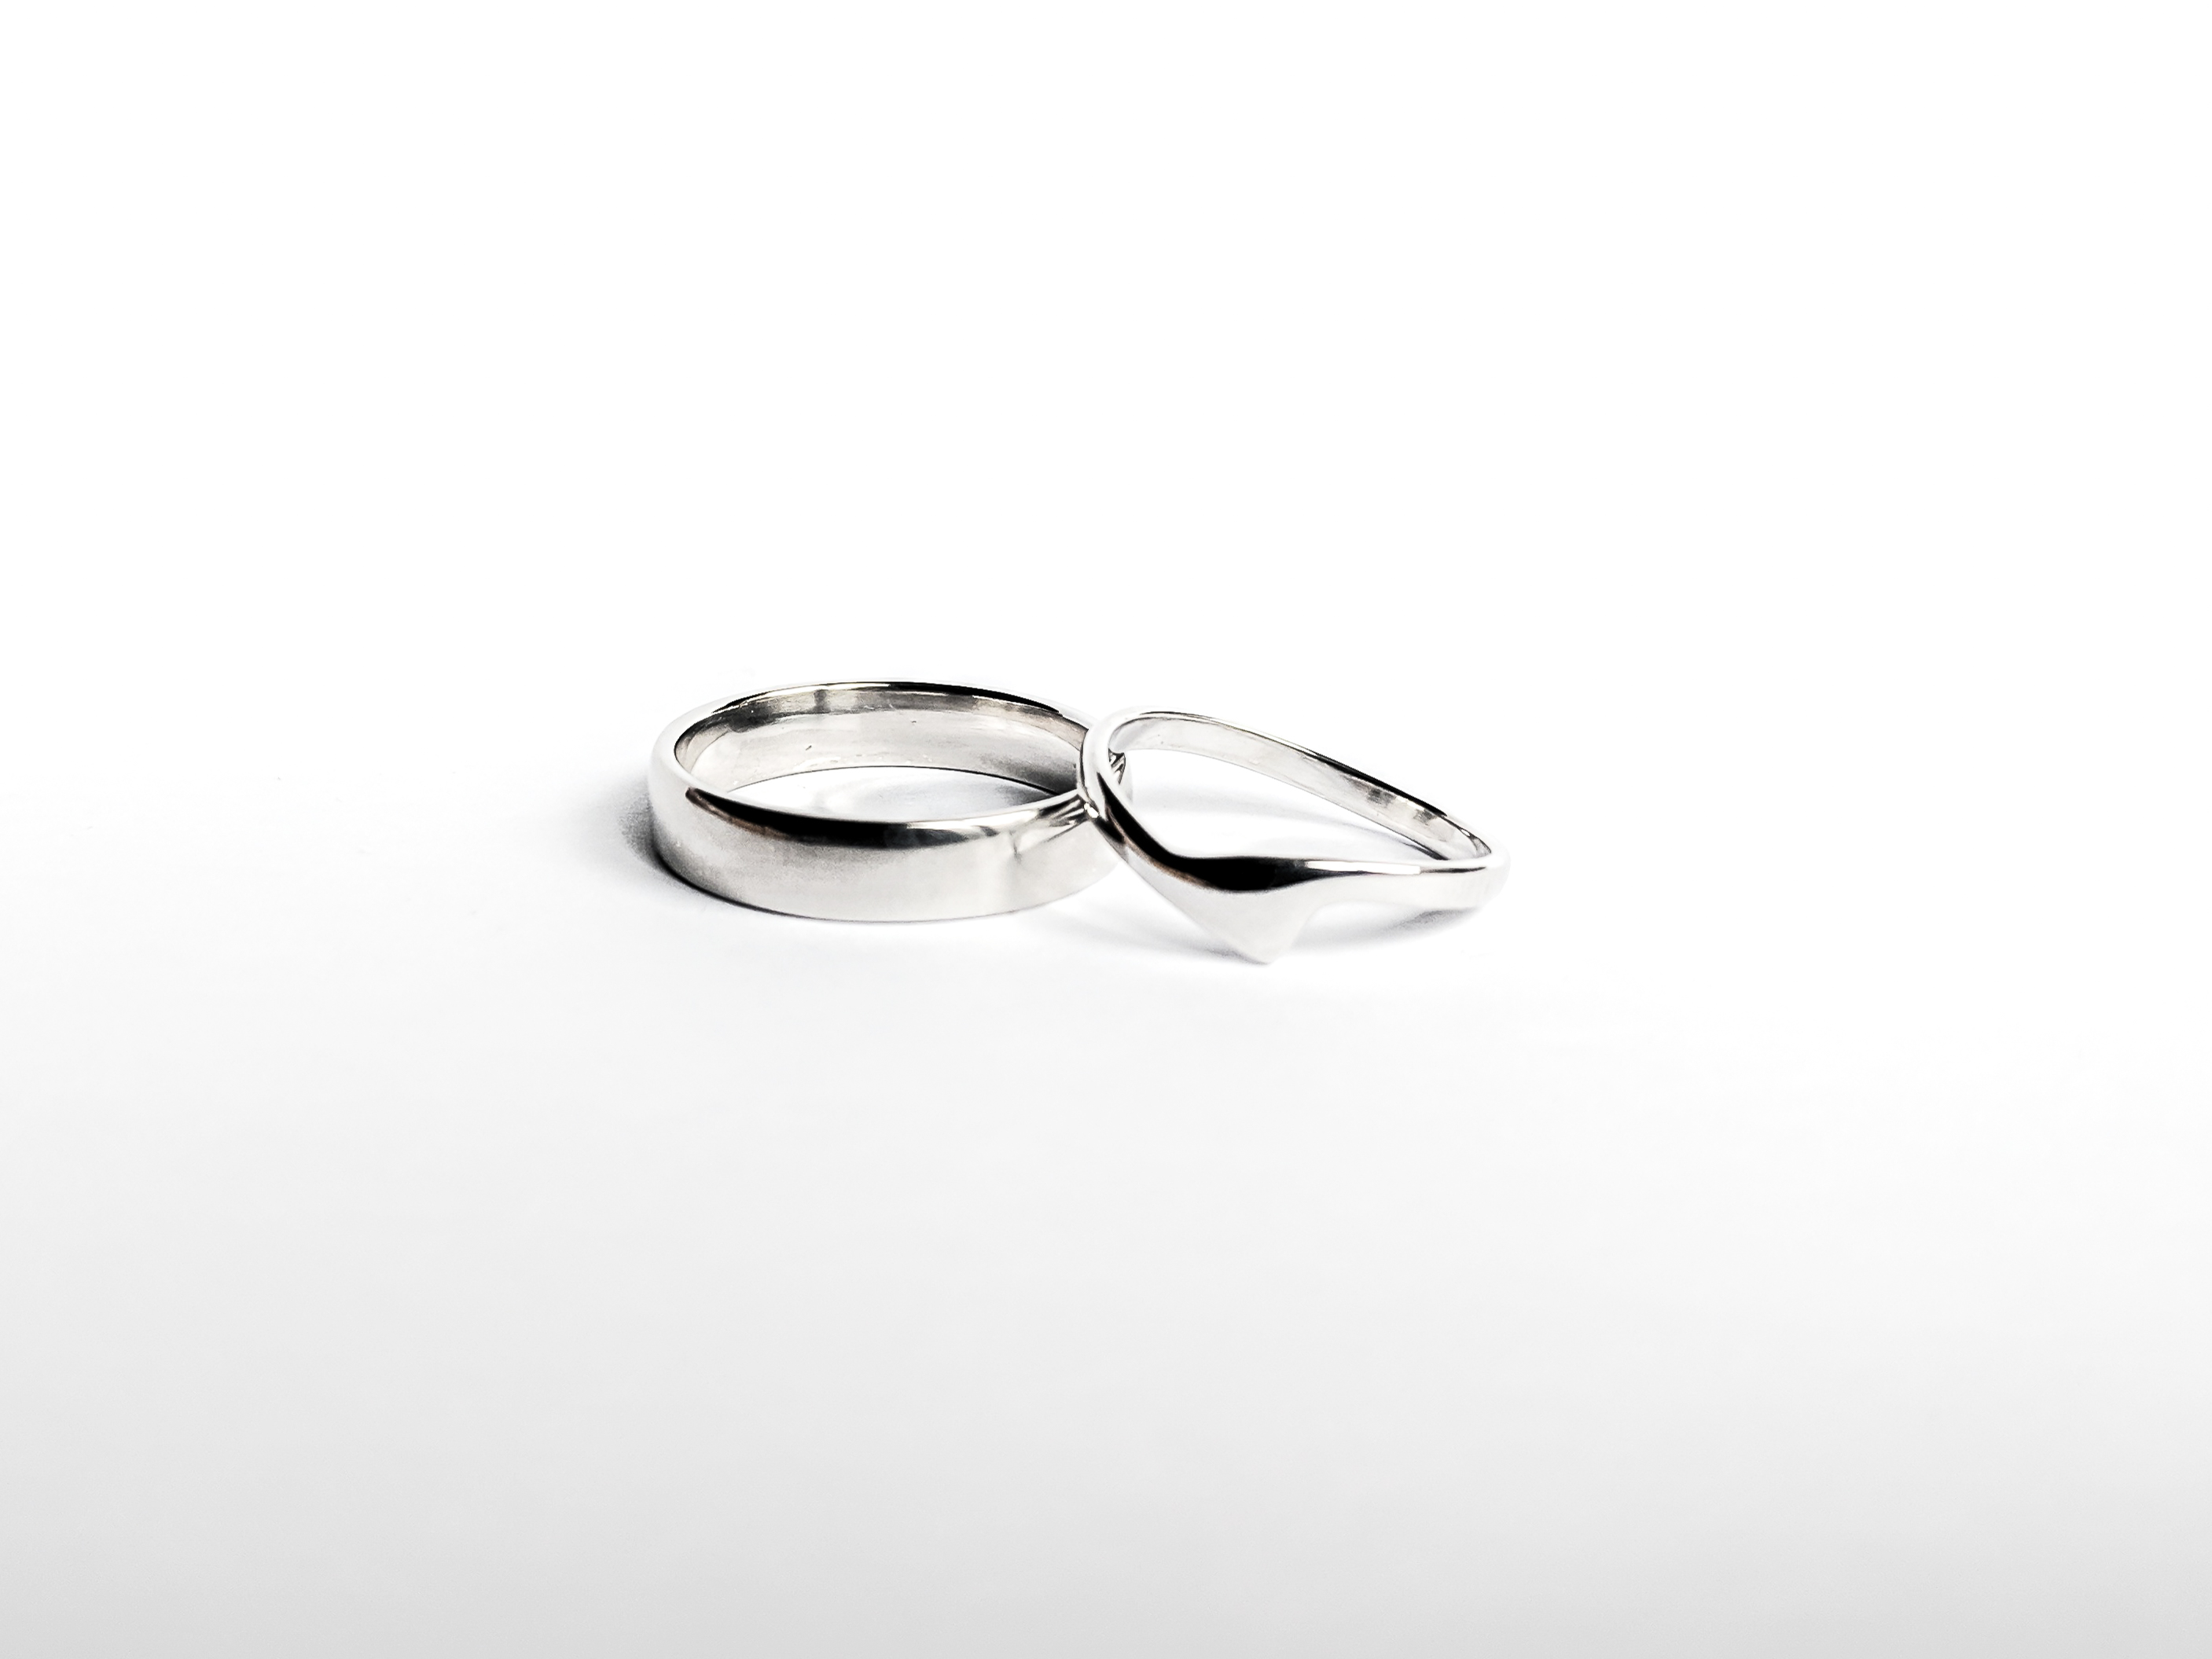 RECYCLED 9CT WHITE GOLD WEDDING RINGS